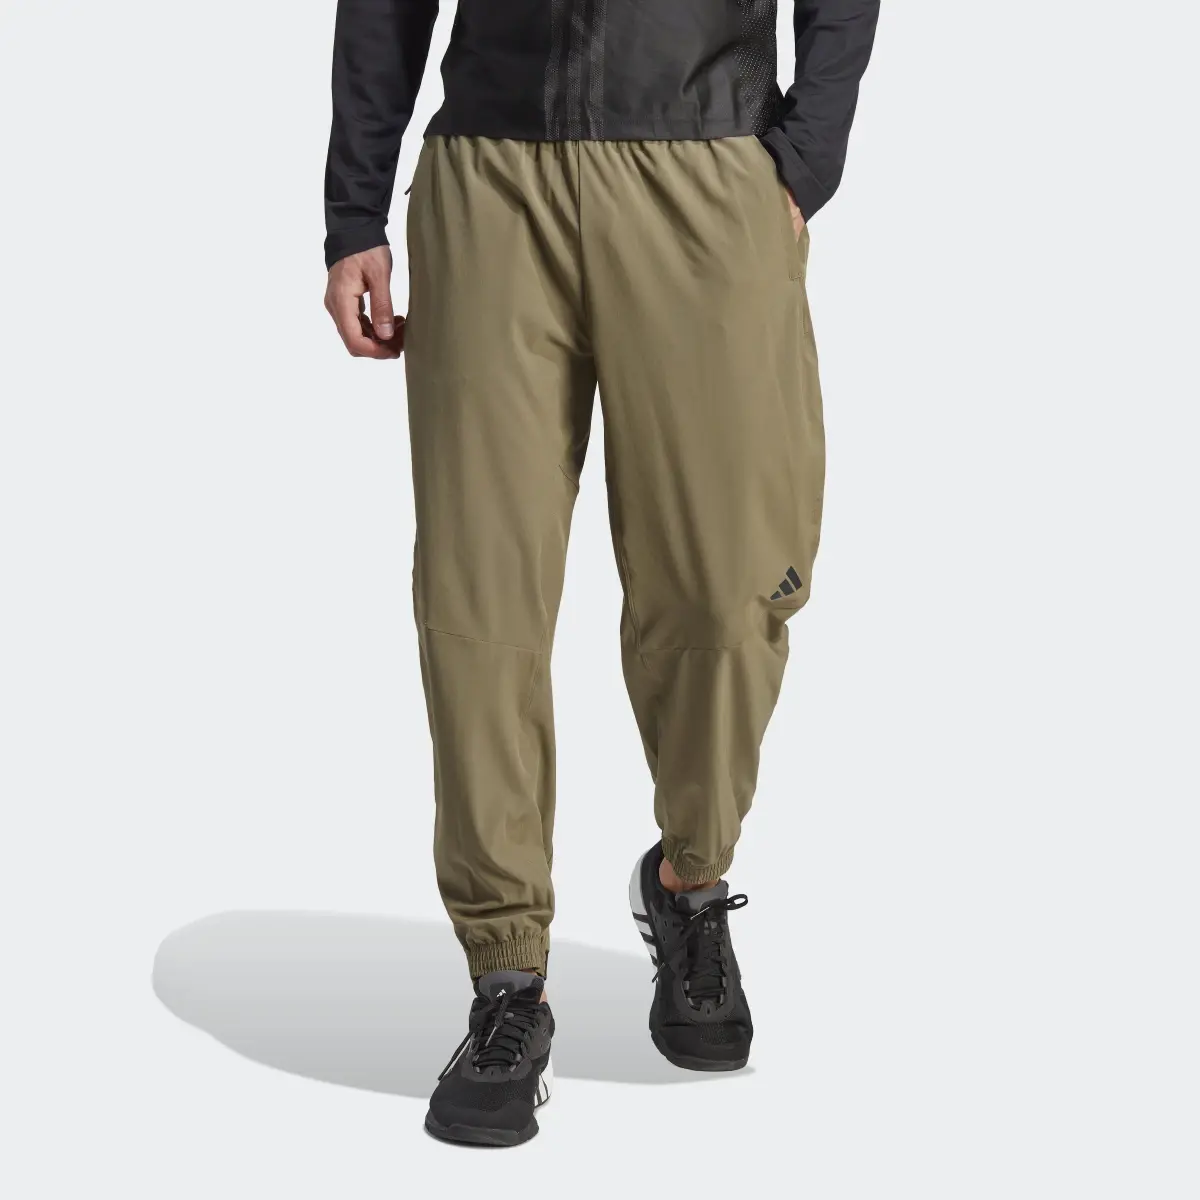 Adidas Designed for Training Pro Series Strength Pants. 1